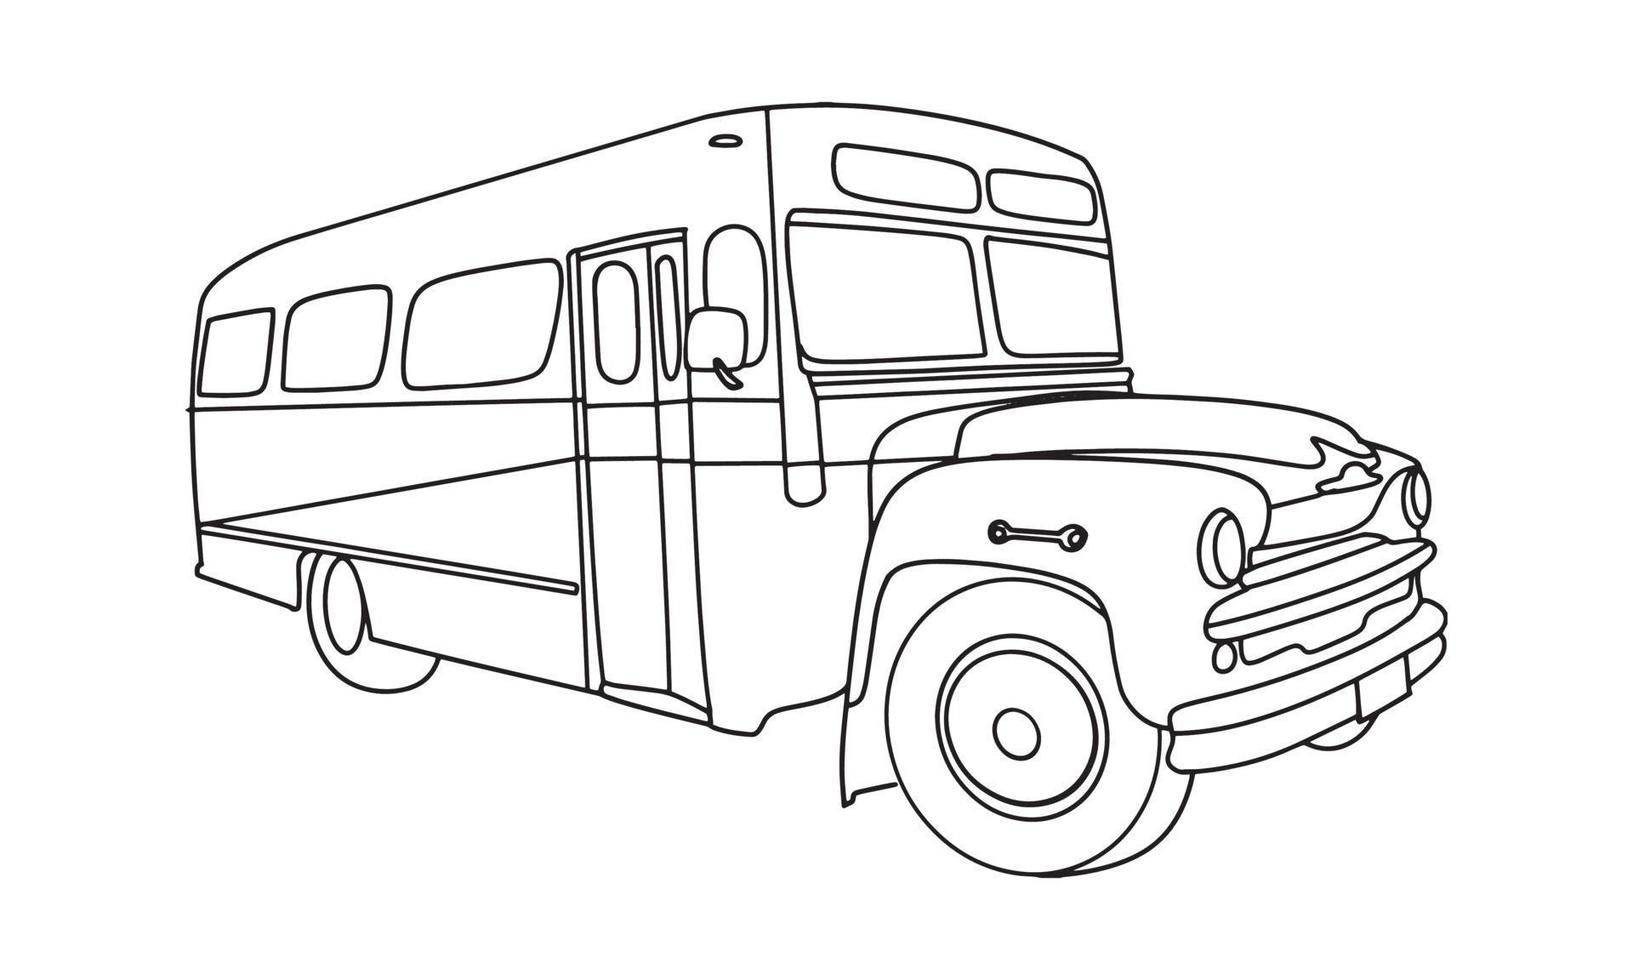 Bus illustration in hand drawing. vector